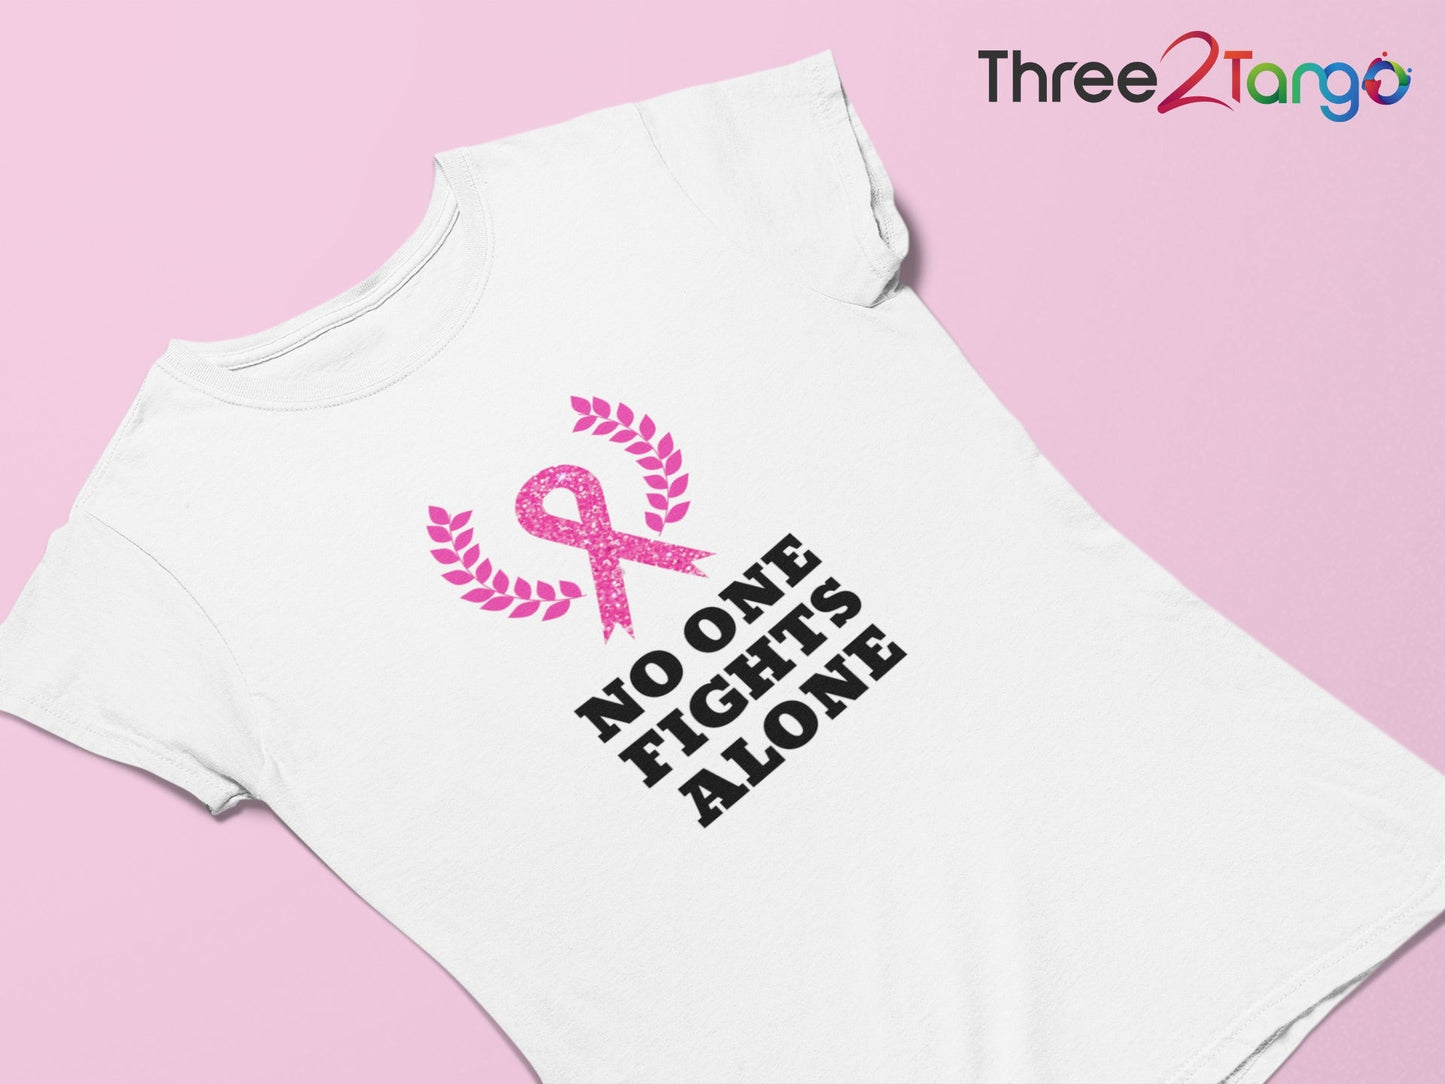 No one fights alone Cancer T-shirt | Breast Cancer Awareness Shirt - Three2Tango Tee's